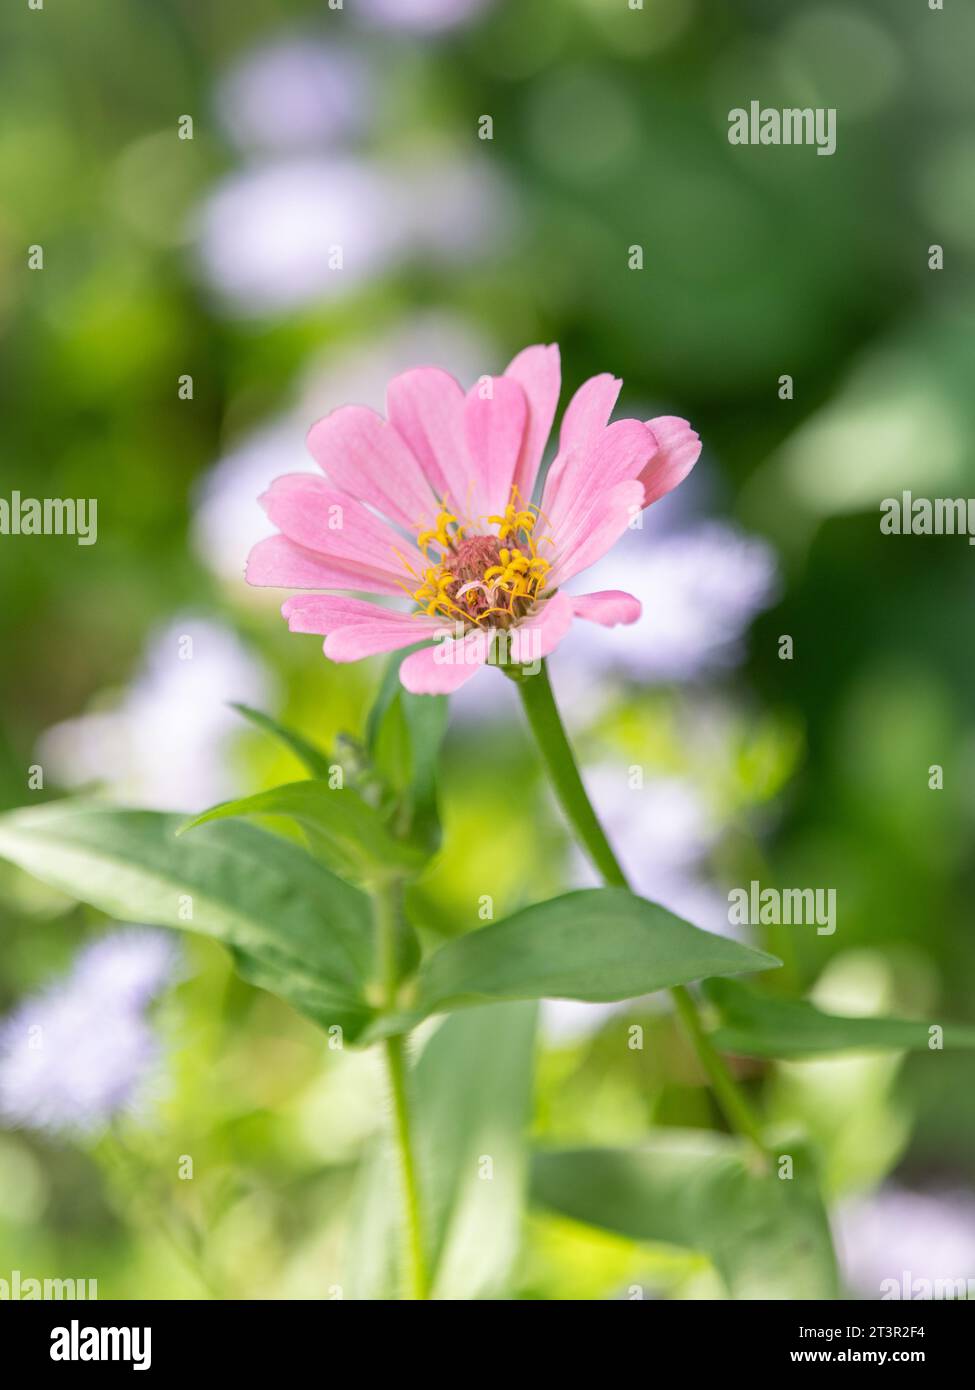 A single soft pink zinnia against a blurred green and blue background. Stock Photo